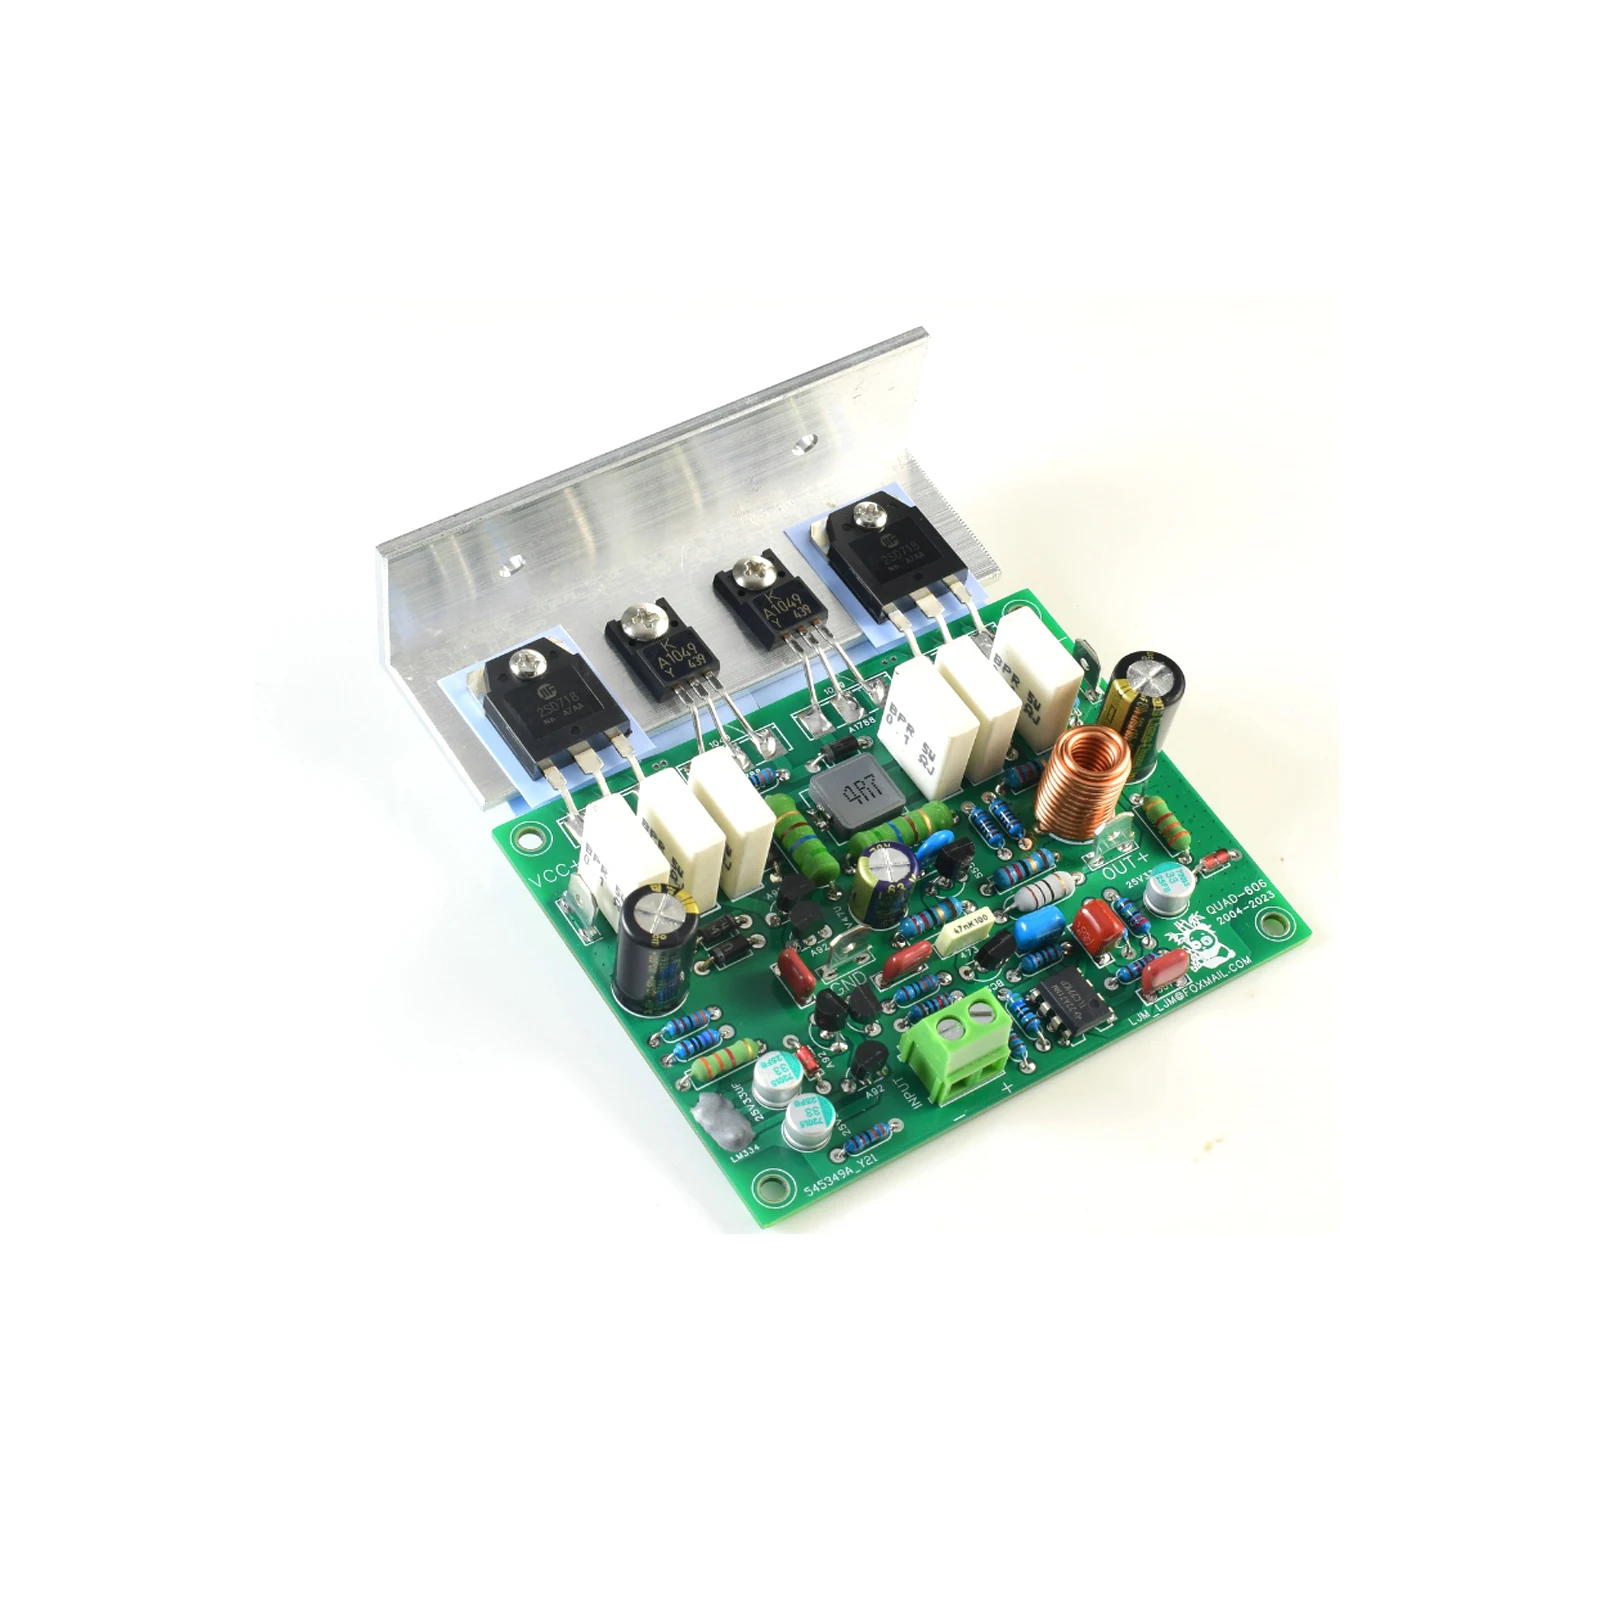 

Imitation of British Classical Amplifier QUAD606 Mono DIY Kit AMPLIFIER & Finished Board